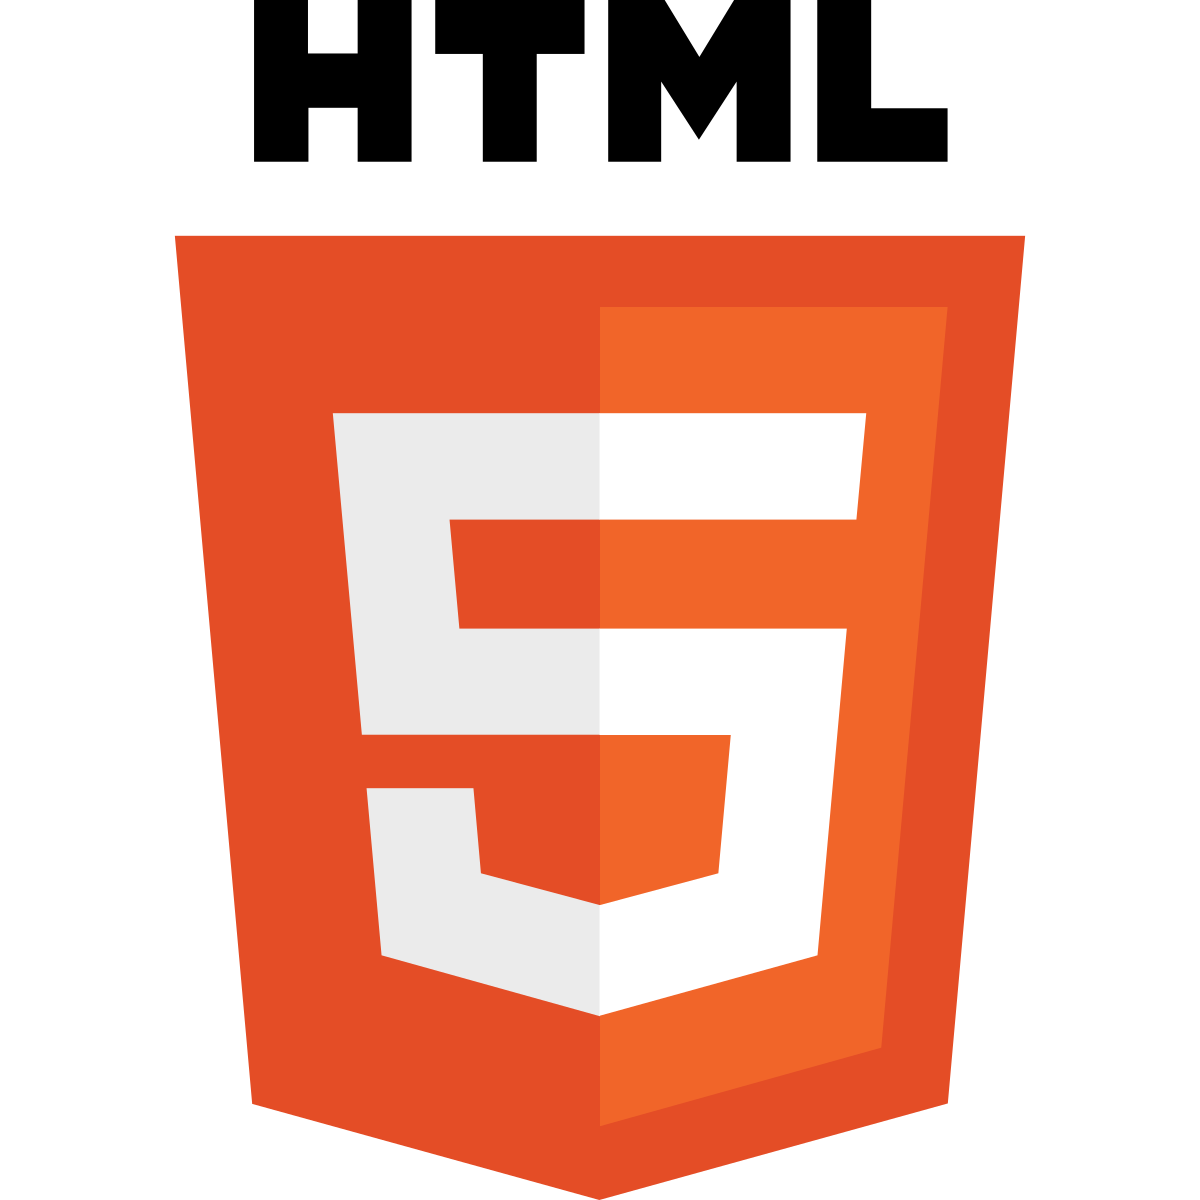 Using HTML5 features today